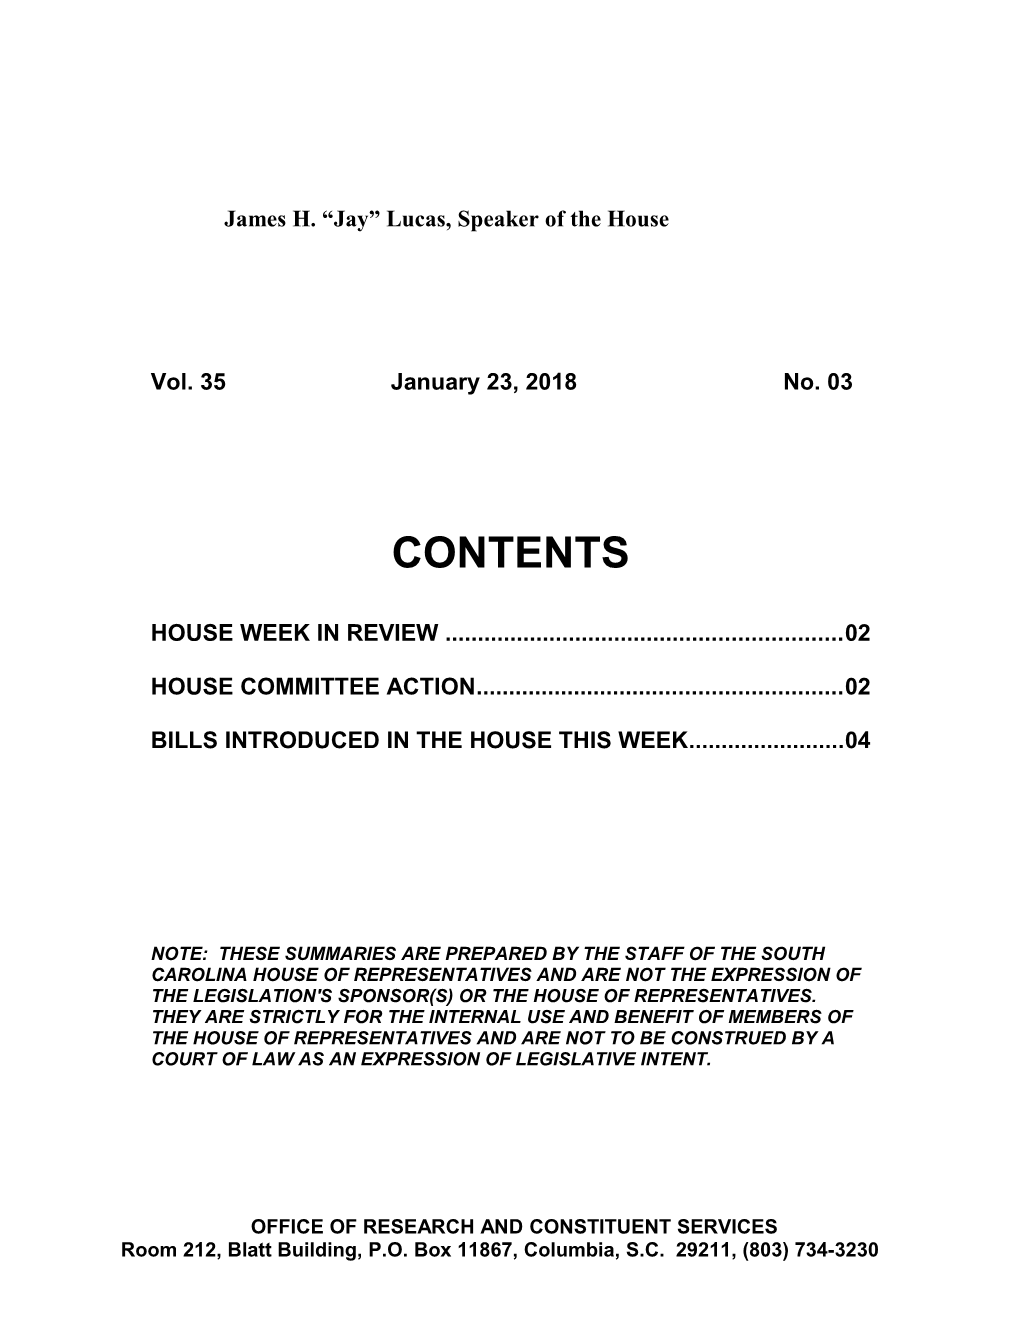 Bills Introduced in the House This Week 04